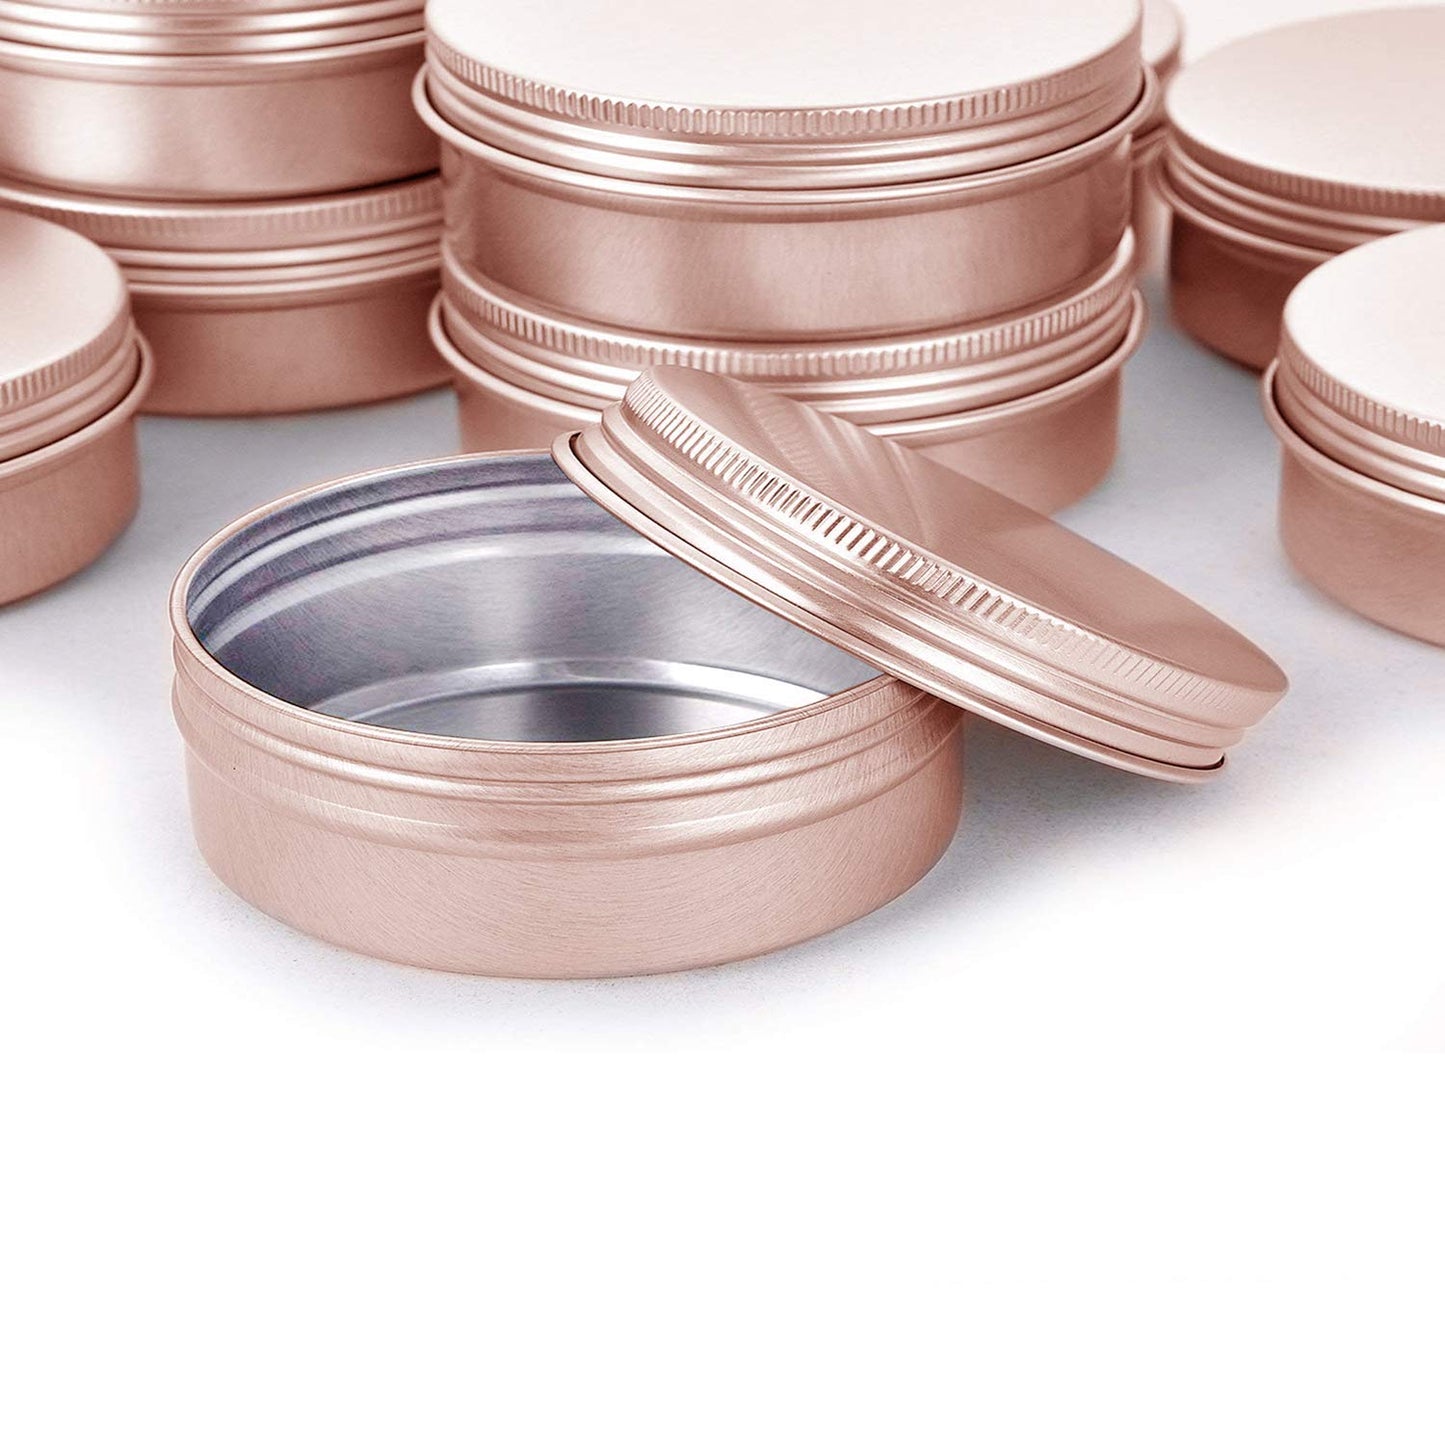 1 Ounce Aluminum Tin Jar Refillable Containers 30ml Aluminum Screw Lid Round Tin Container Bottle for Cosmetic, Lip Balm, Cream, 20 Pcs Rose Gold